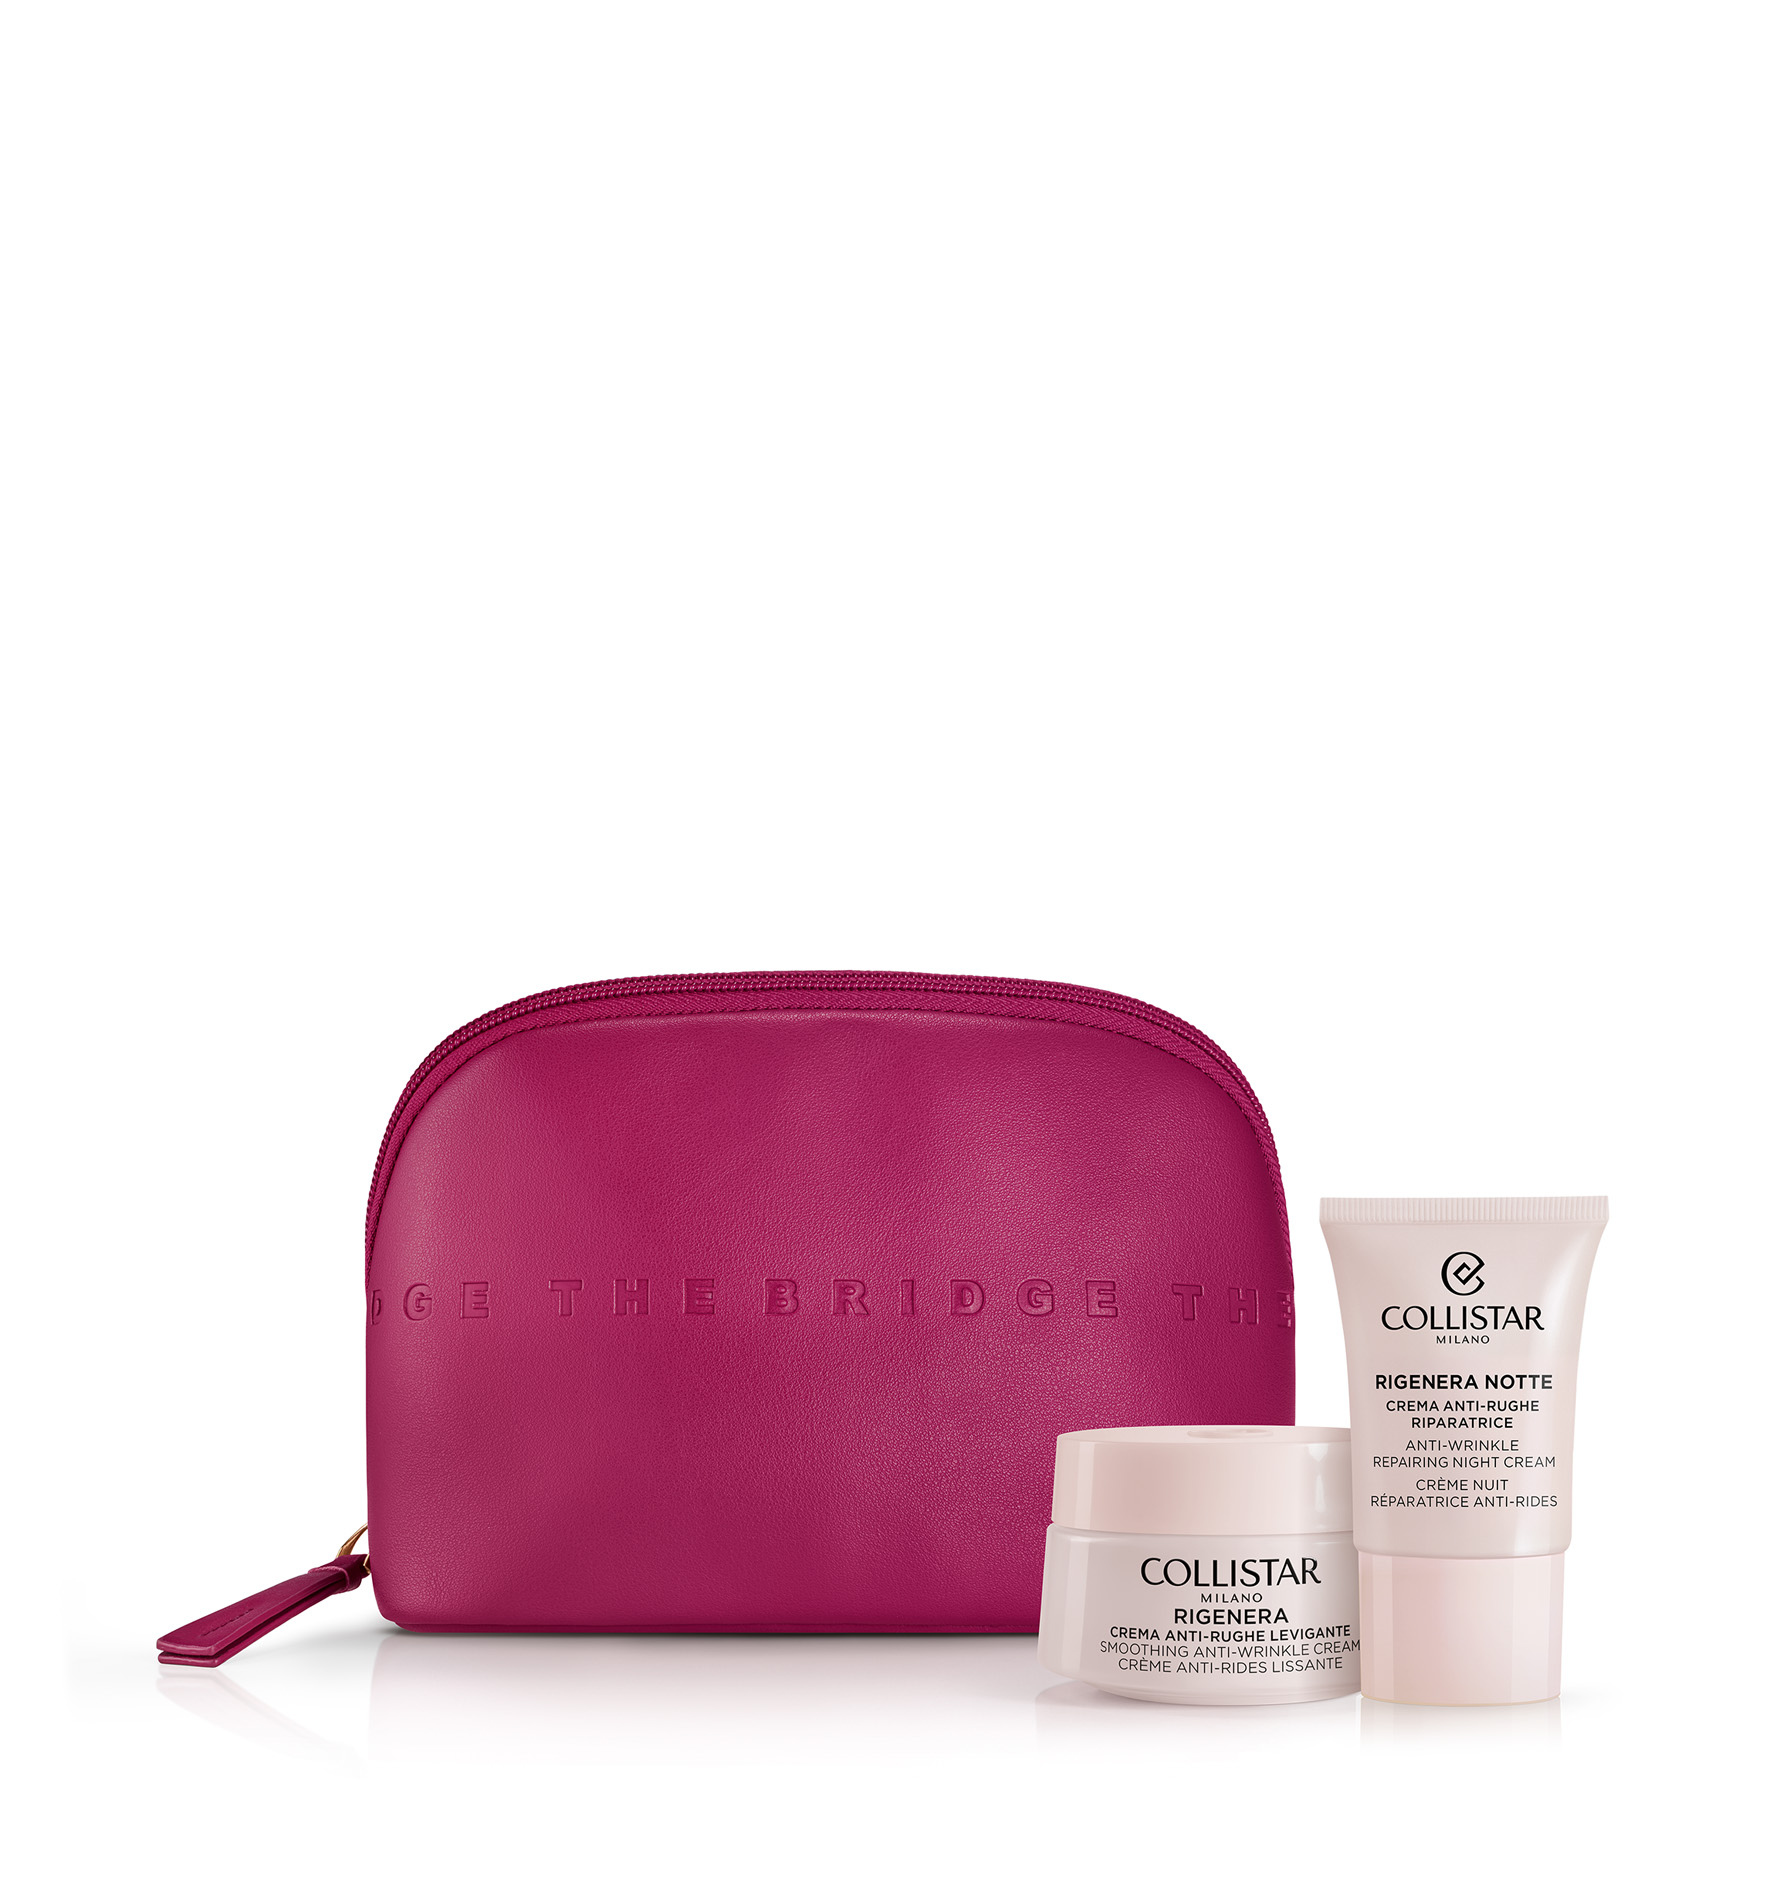 RIGENERA SMOOTHING ANTI-WRINKLE CREAM FACE AND NECK GIFT SET - Rigenera | Collistar - Shop Online Ufficiale